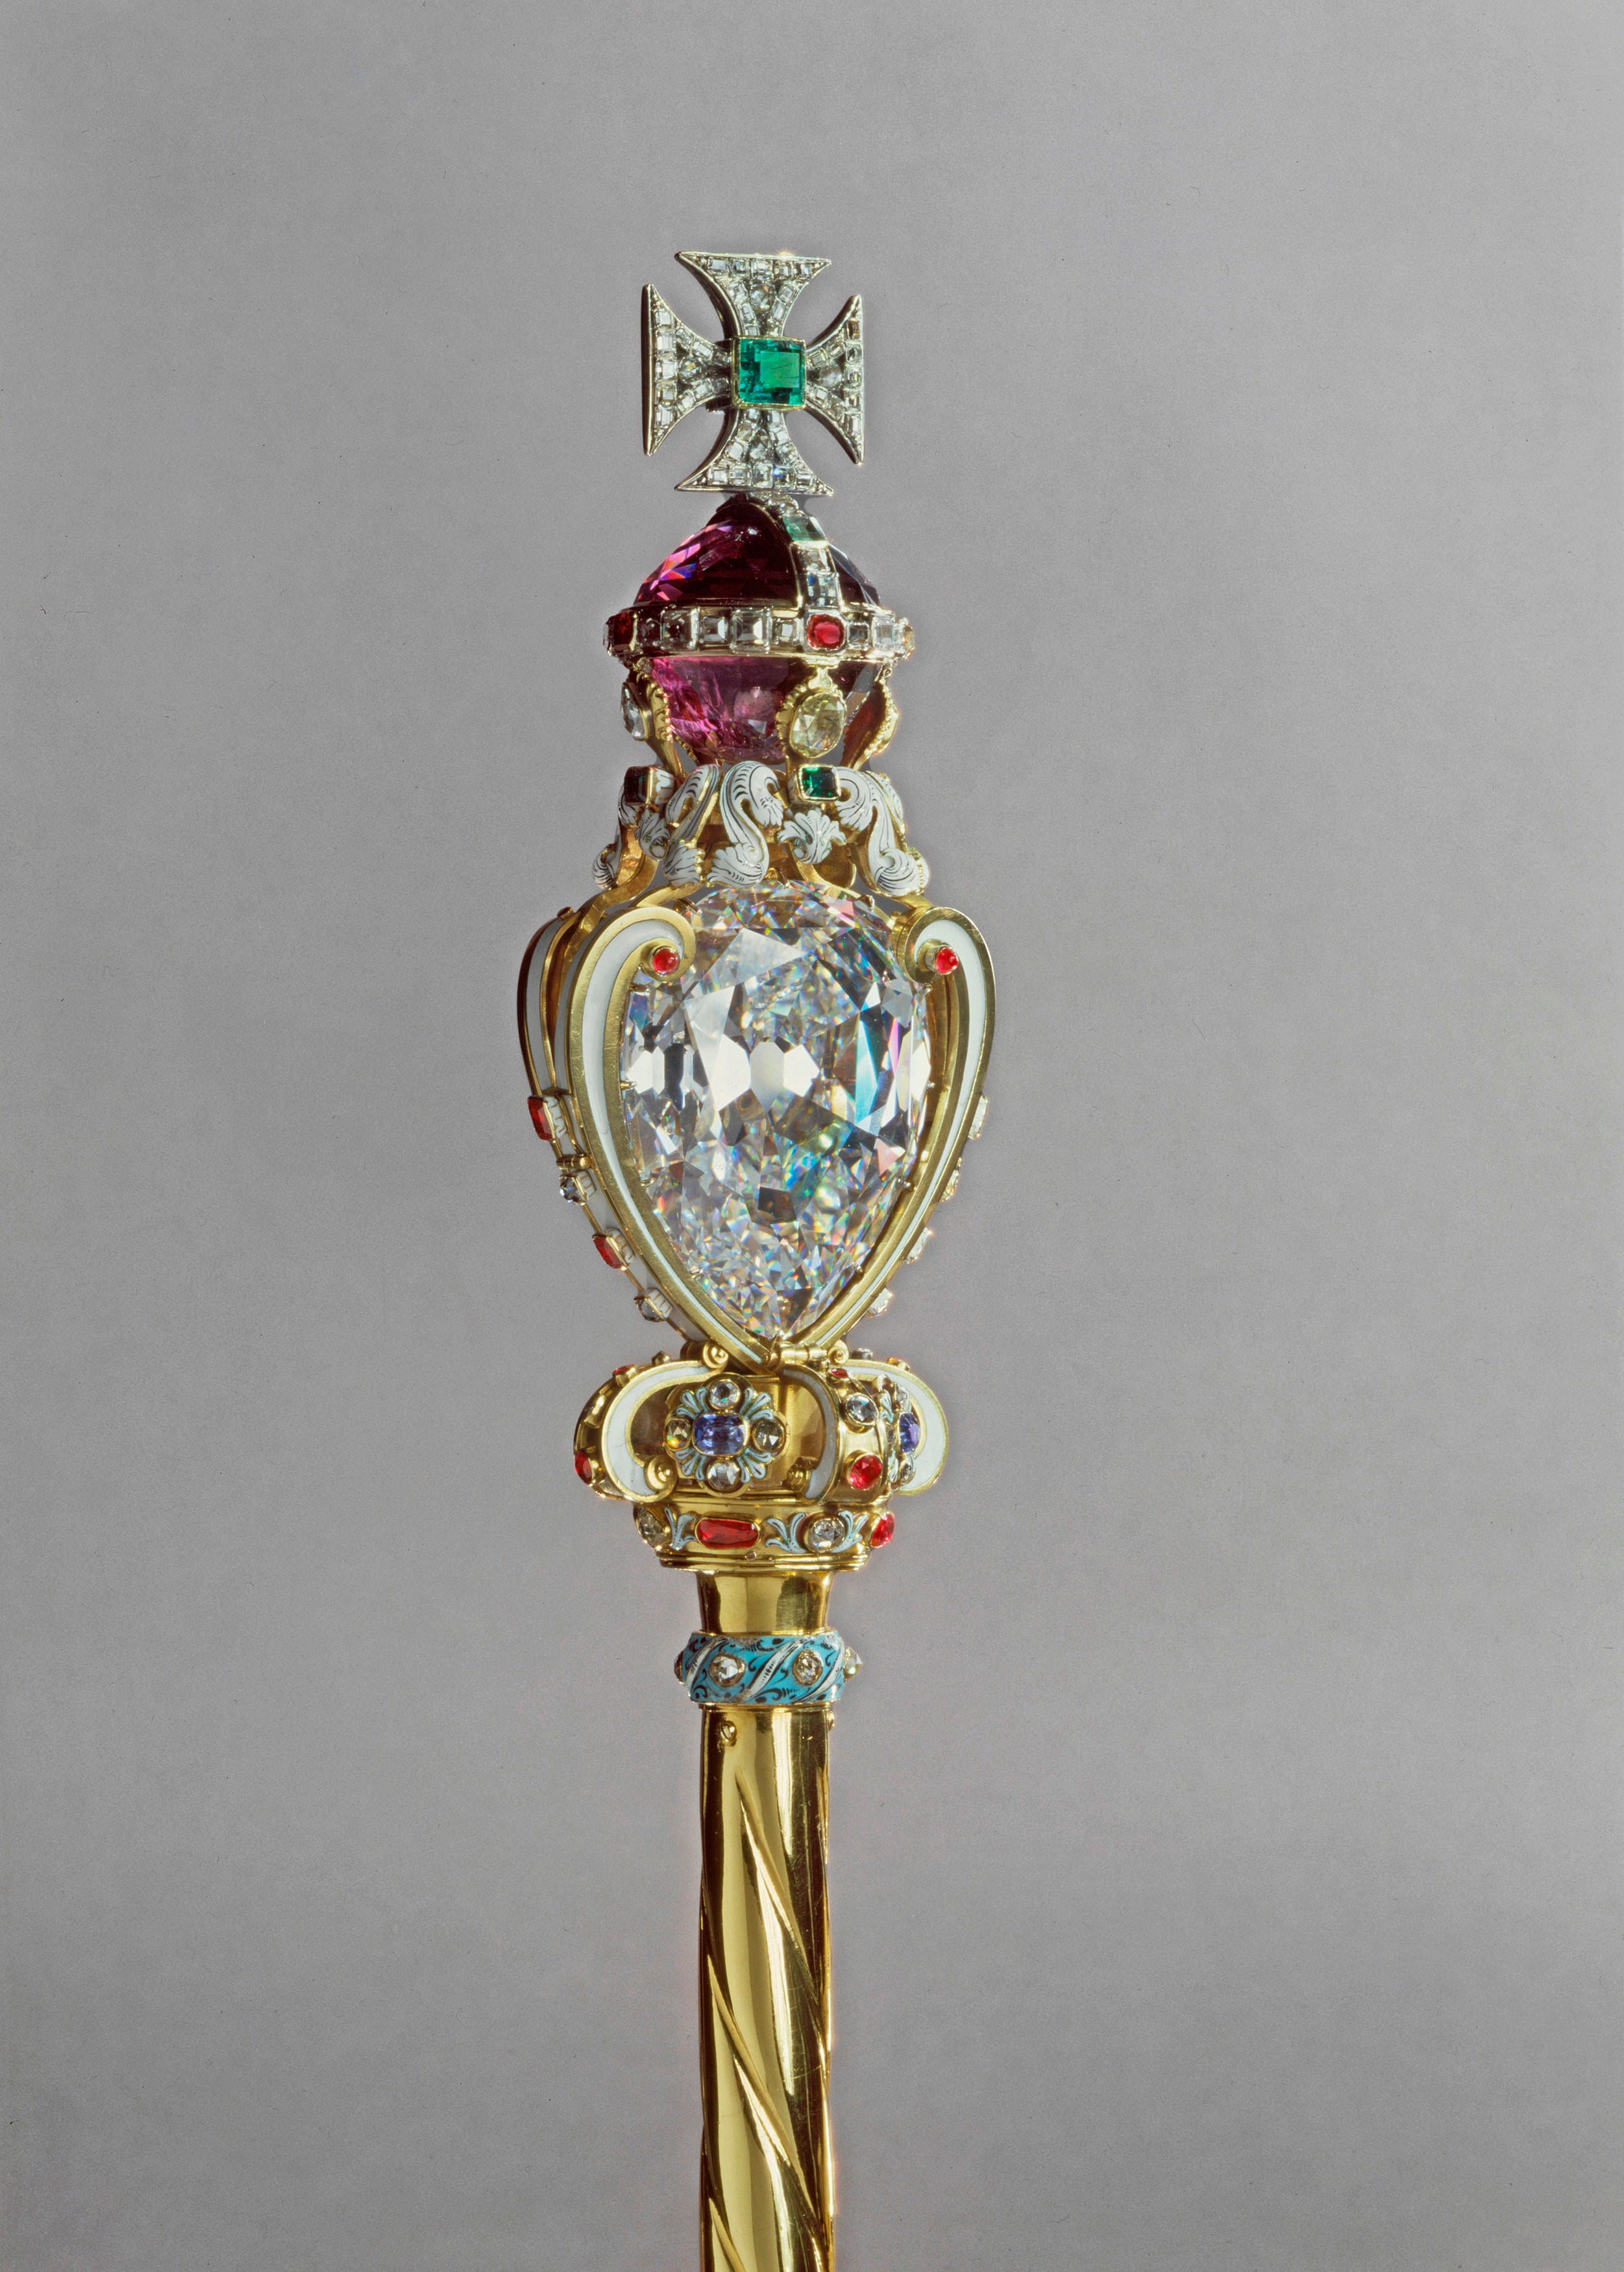 Handout photo issued by Buckingham Palace of the Sovereign’s Sceptre with Cross which will feature during the Coronation of King Charles III at Westminster Abbey